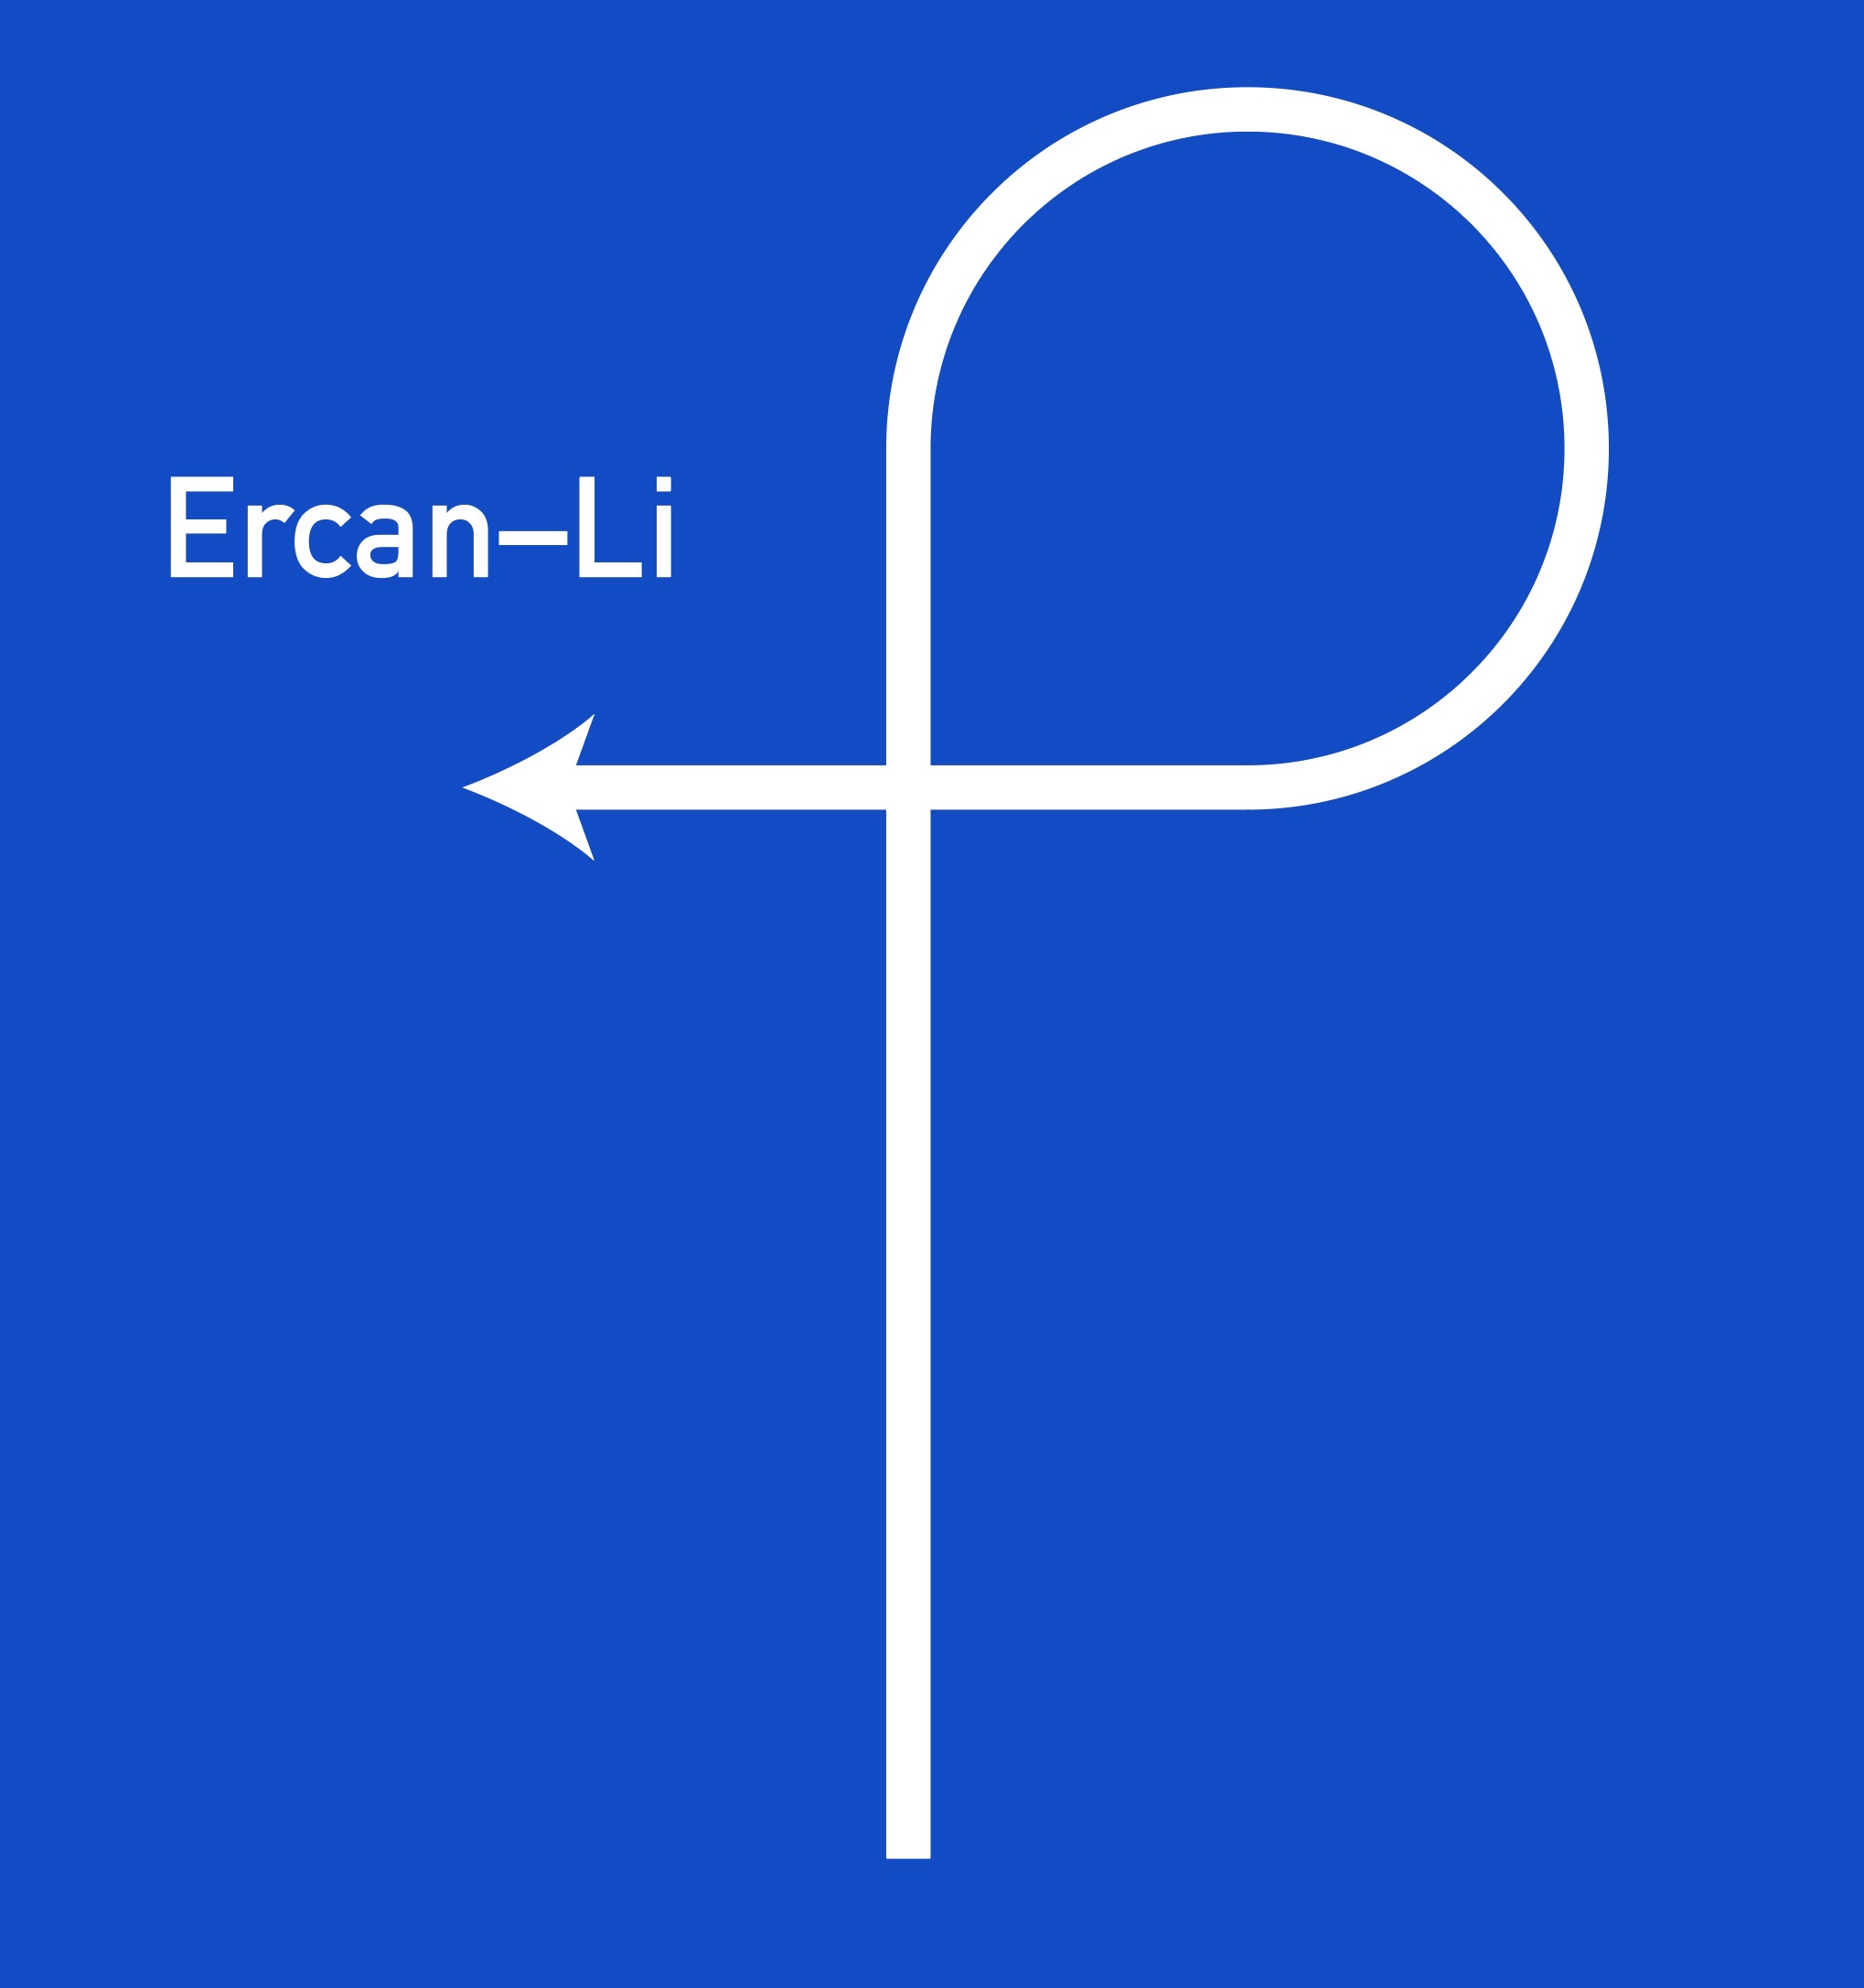 Looping line with arrow at the end. Ercan-Li in text above the end of the arrow